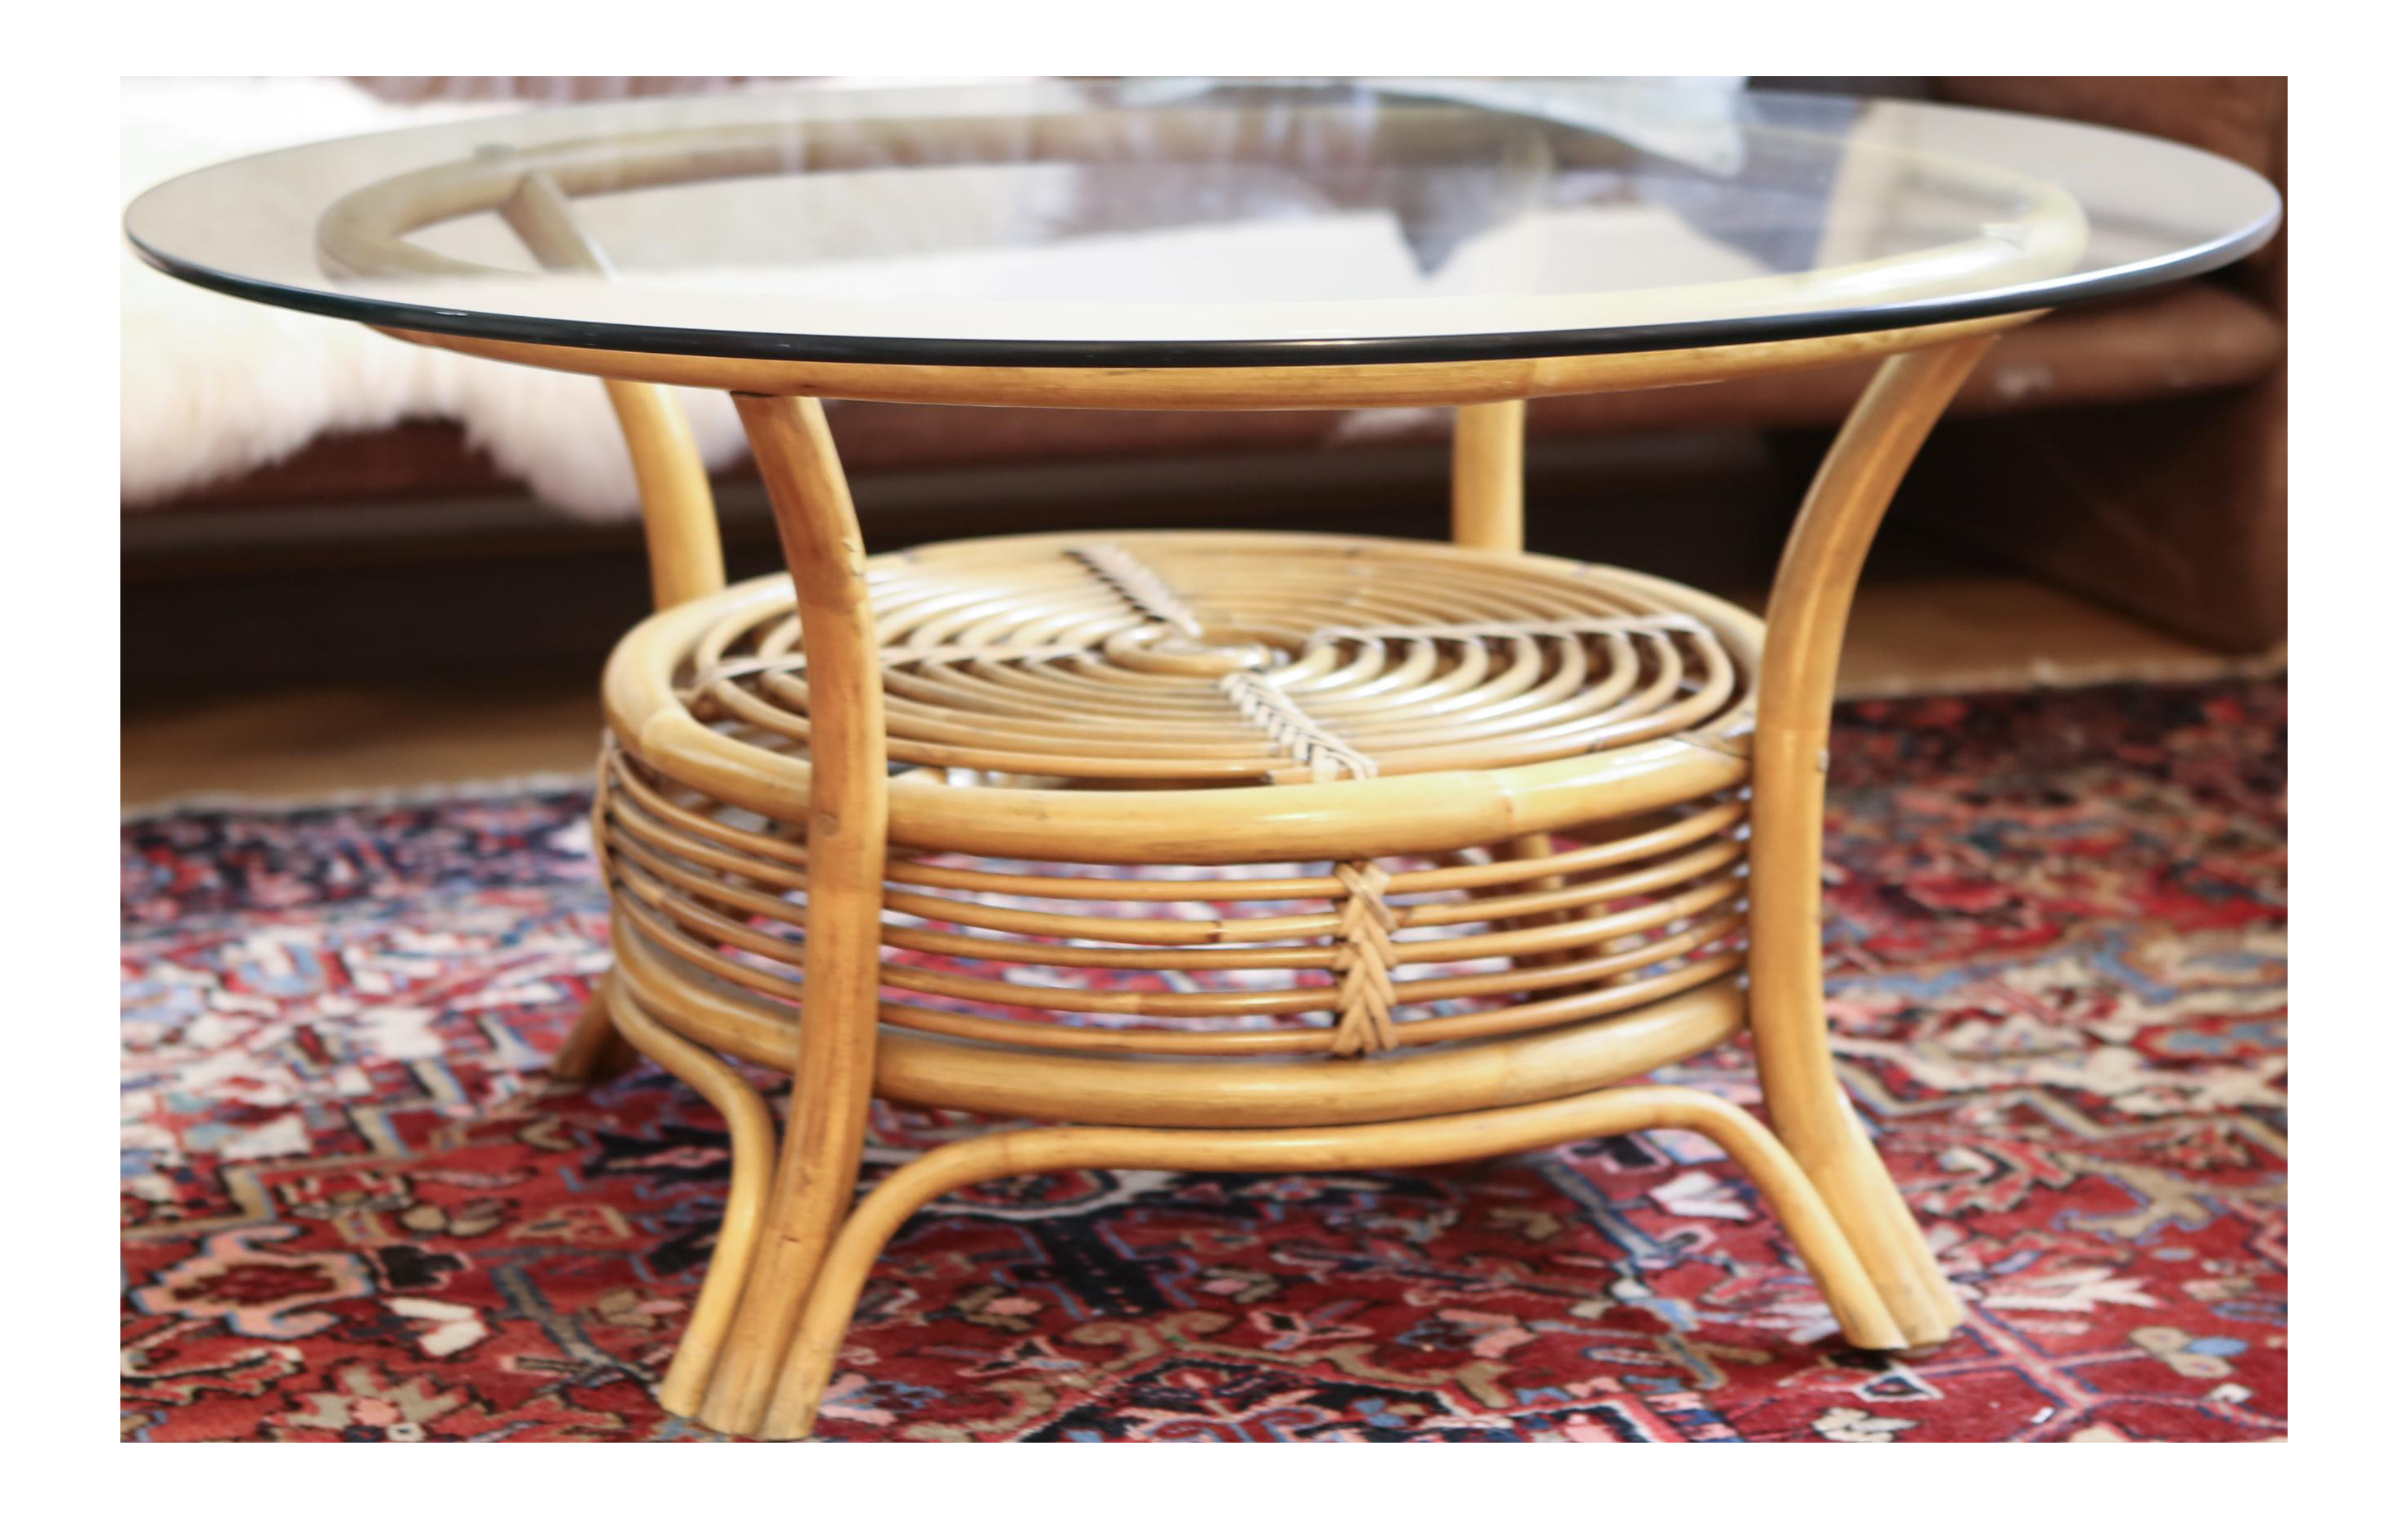 Round Rattan Coffee Table With Glass Top Answerplane in size 2941 X 1854